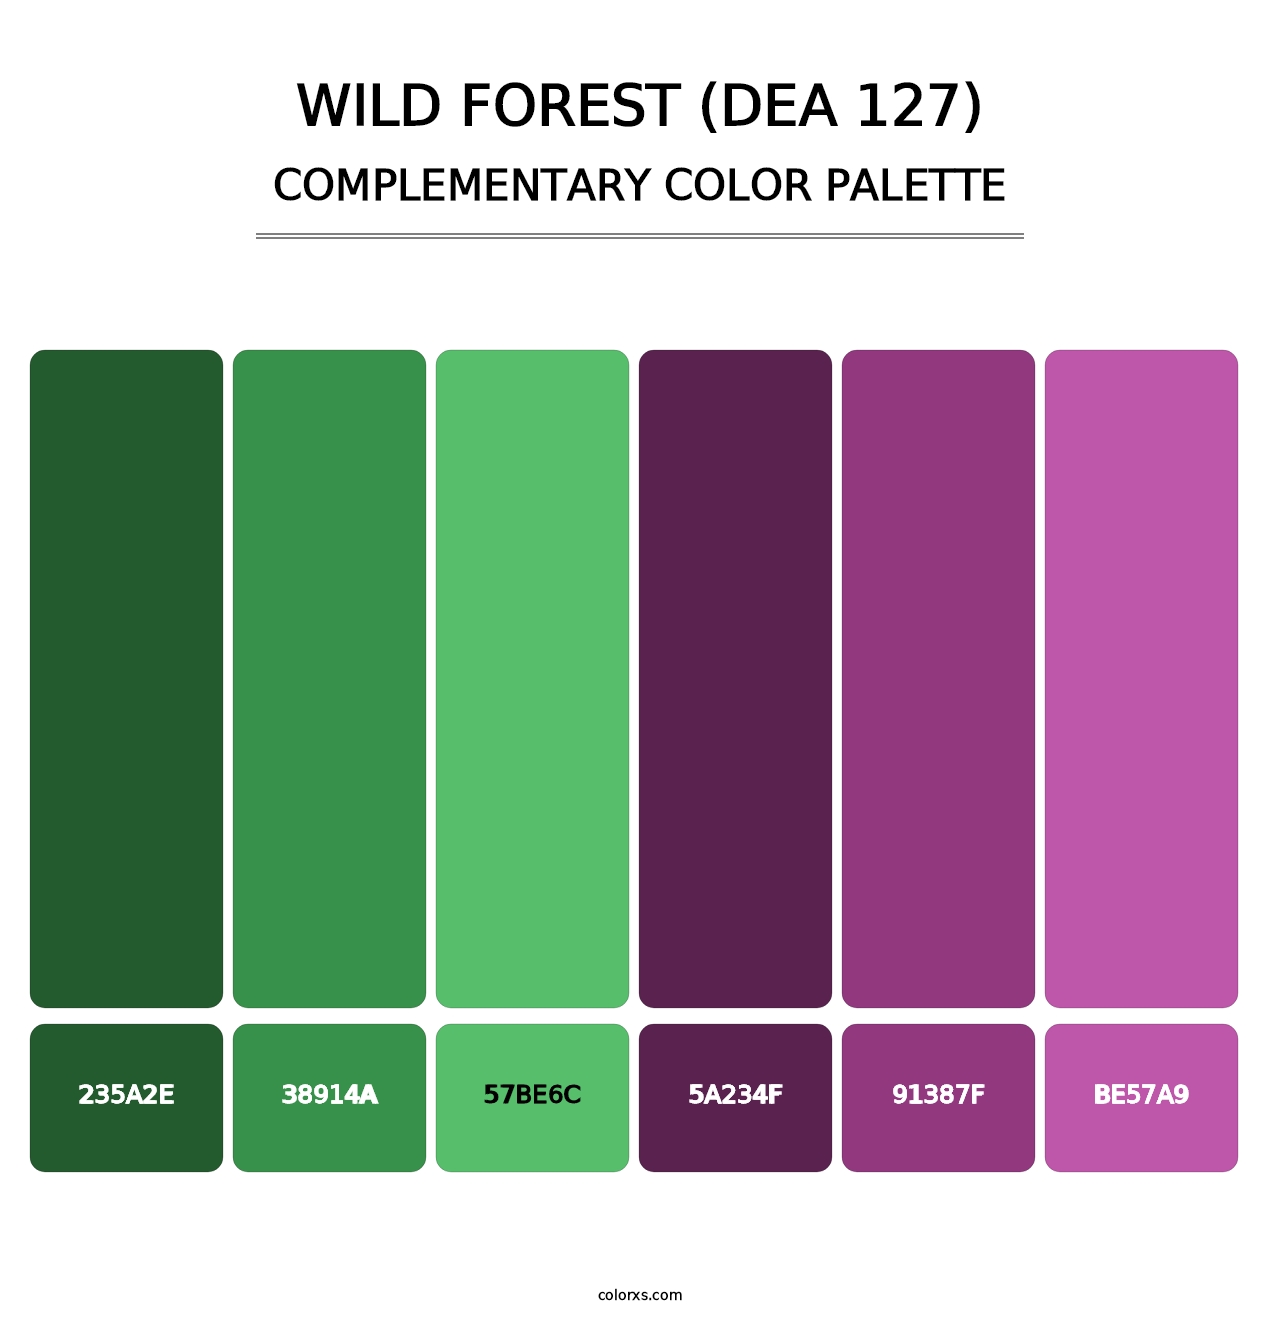 Wild Forest (DEA 127) - Complementary Color Palette